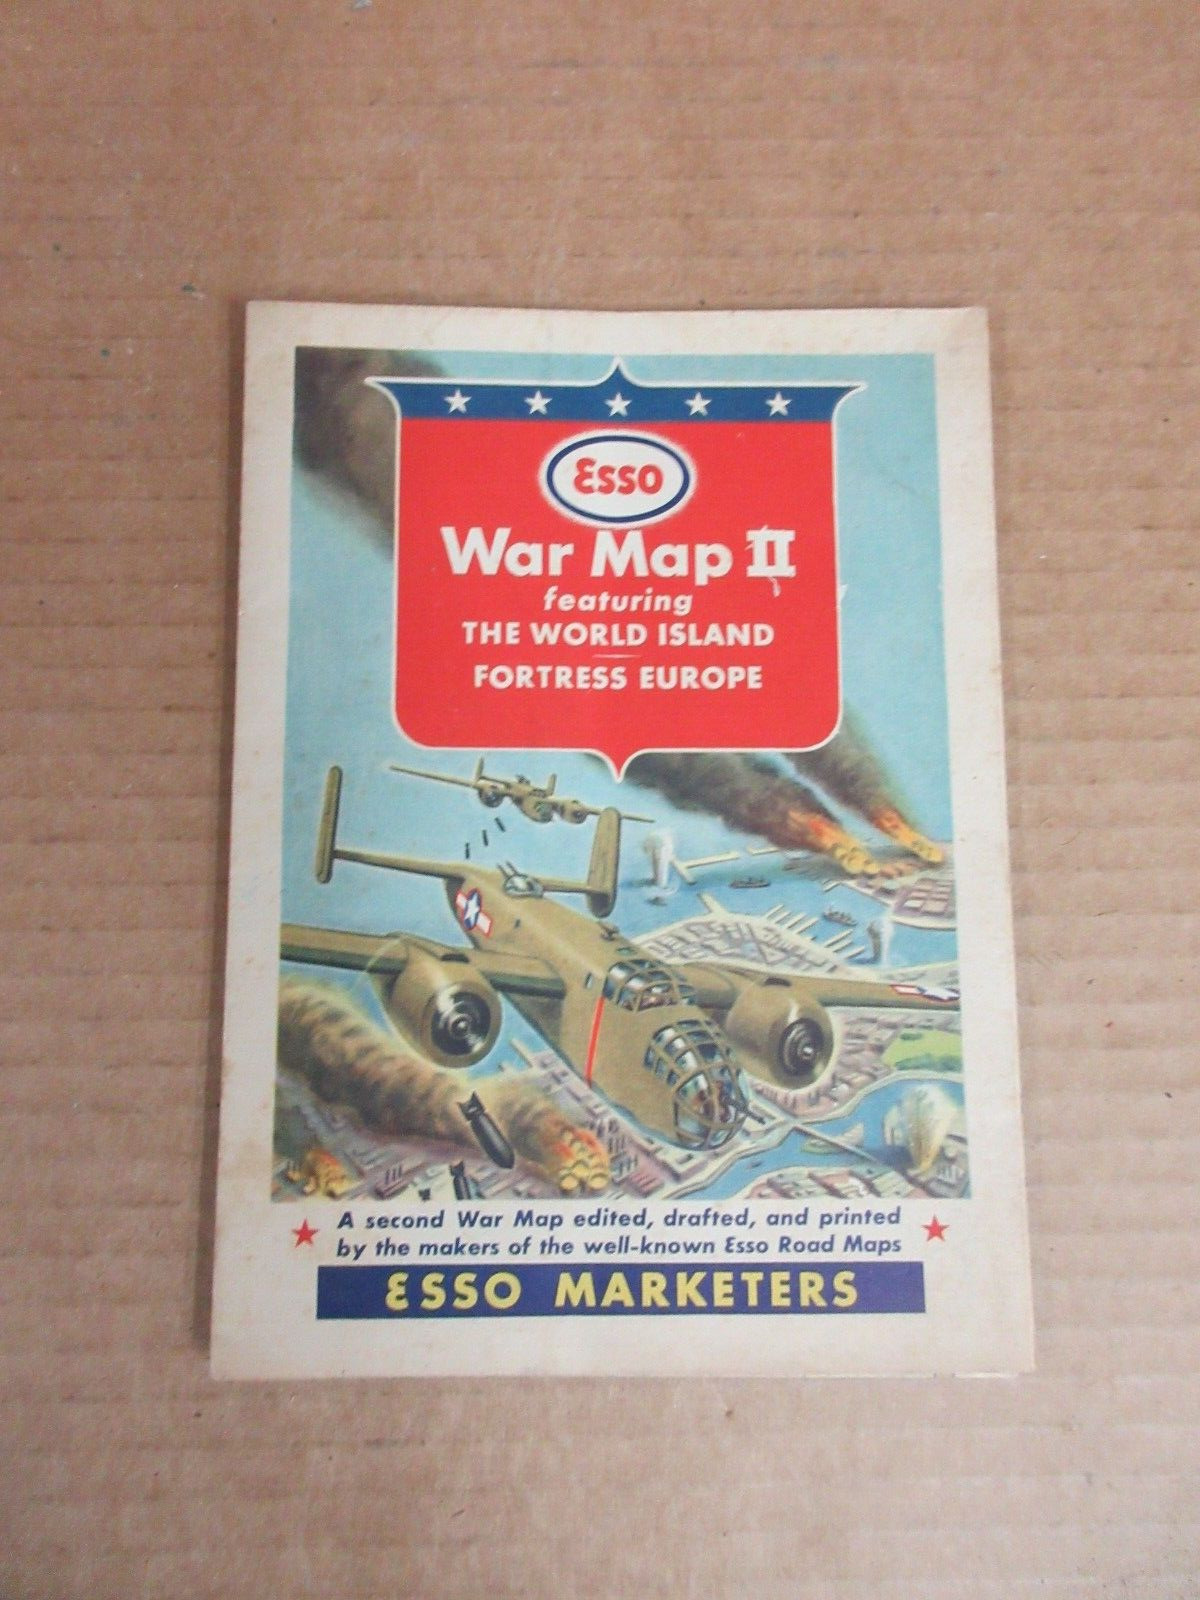 Vintage Esso War Map II Featuring The World Island Fortress Europe